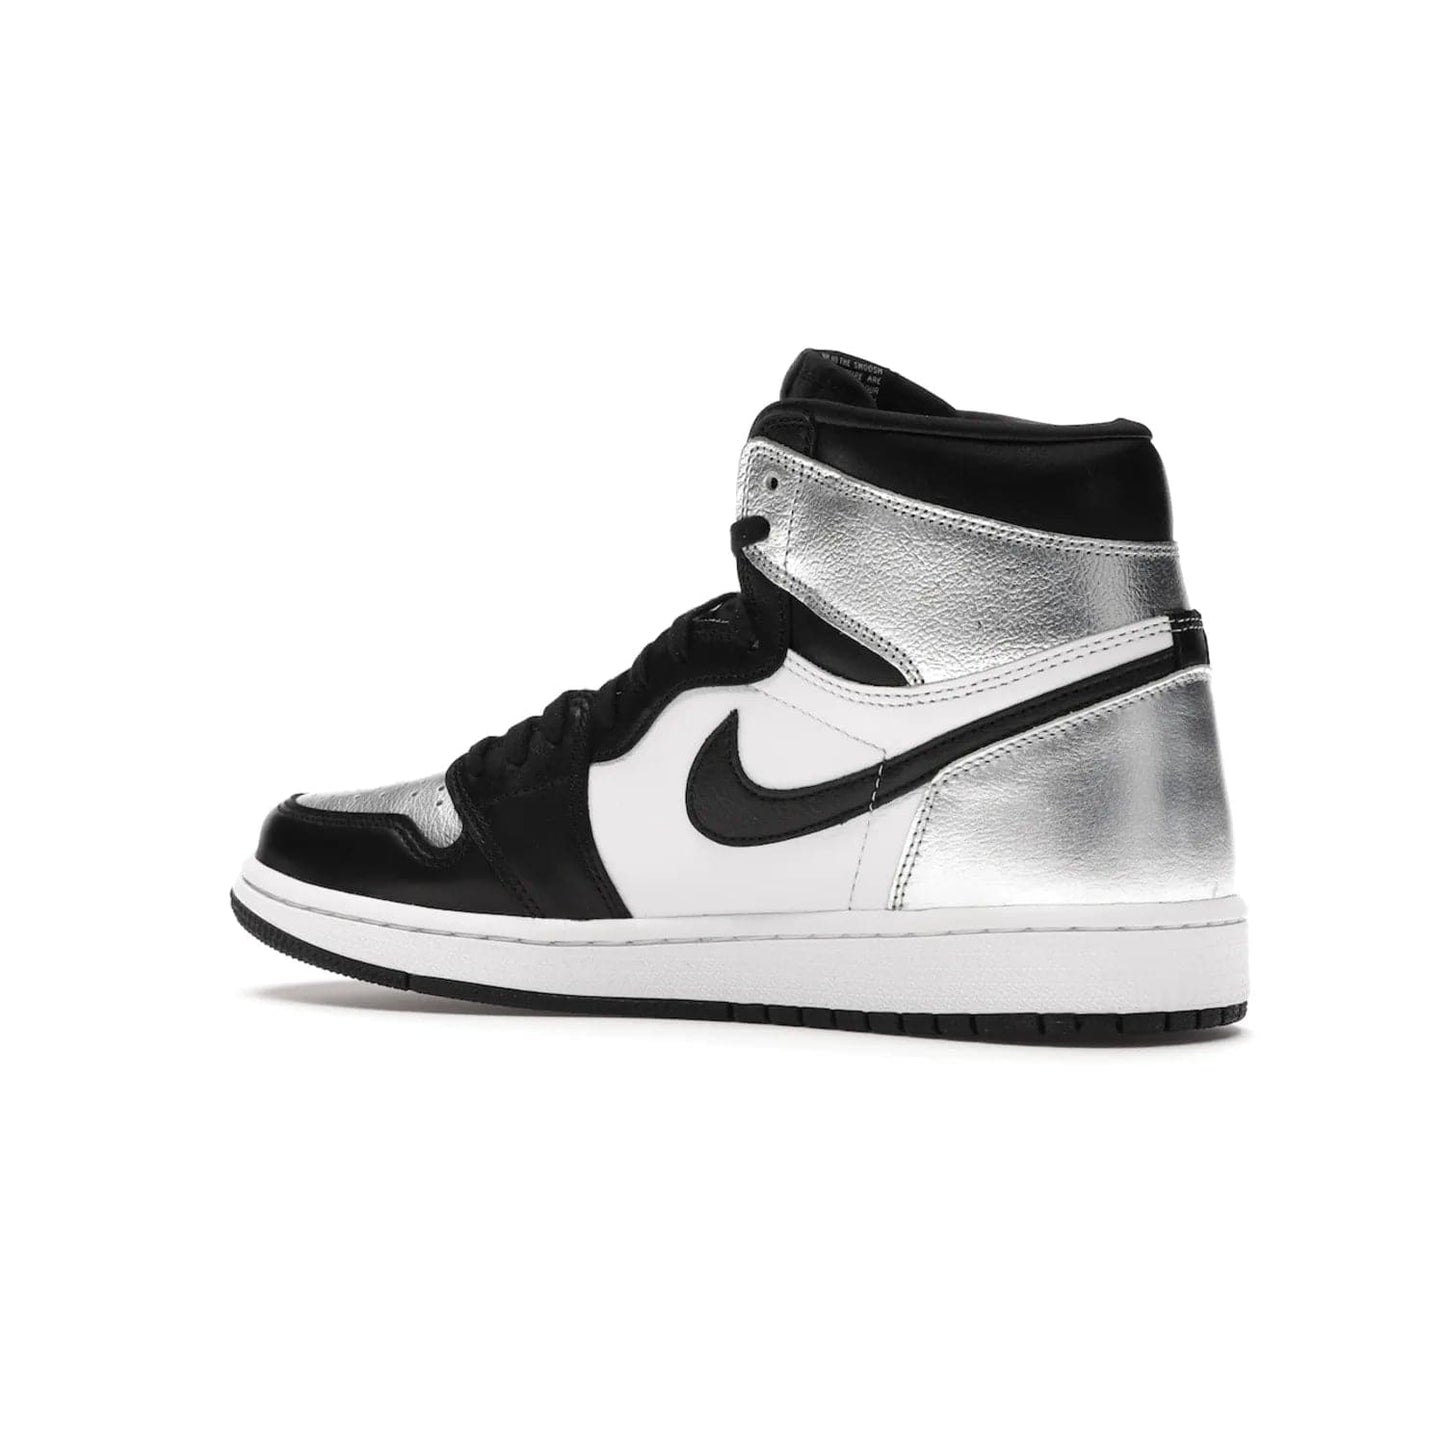 Jordan 1 Retro High Silver Toe (Women's) - Image 22 - Only at www.BallersClubKickz.com - Introducing the Jordan 1 Retro High Silver Toe (Women's): an updated spin on the iconic 'Black Toe' theme. Featuring white & black leather and silver patent leather construction. Nike Air branding, Air Jordan Wings logo, and white/black sole finish give a classic look. The perfect addition to an on-trend streetwear look. Available in classic black & white, this Jordan 1 is an instant classic. Released in February 20